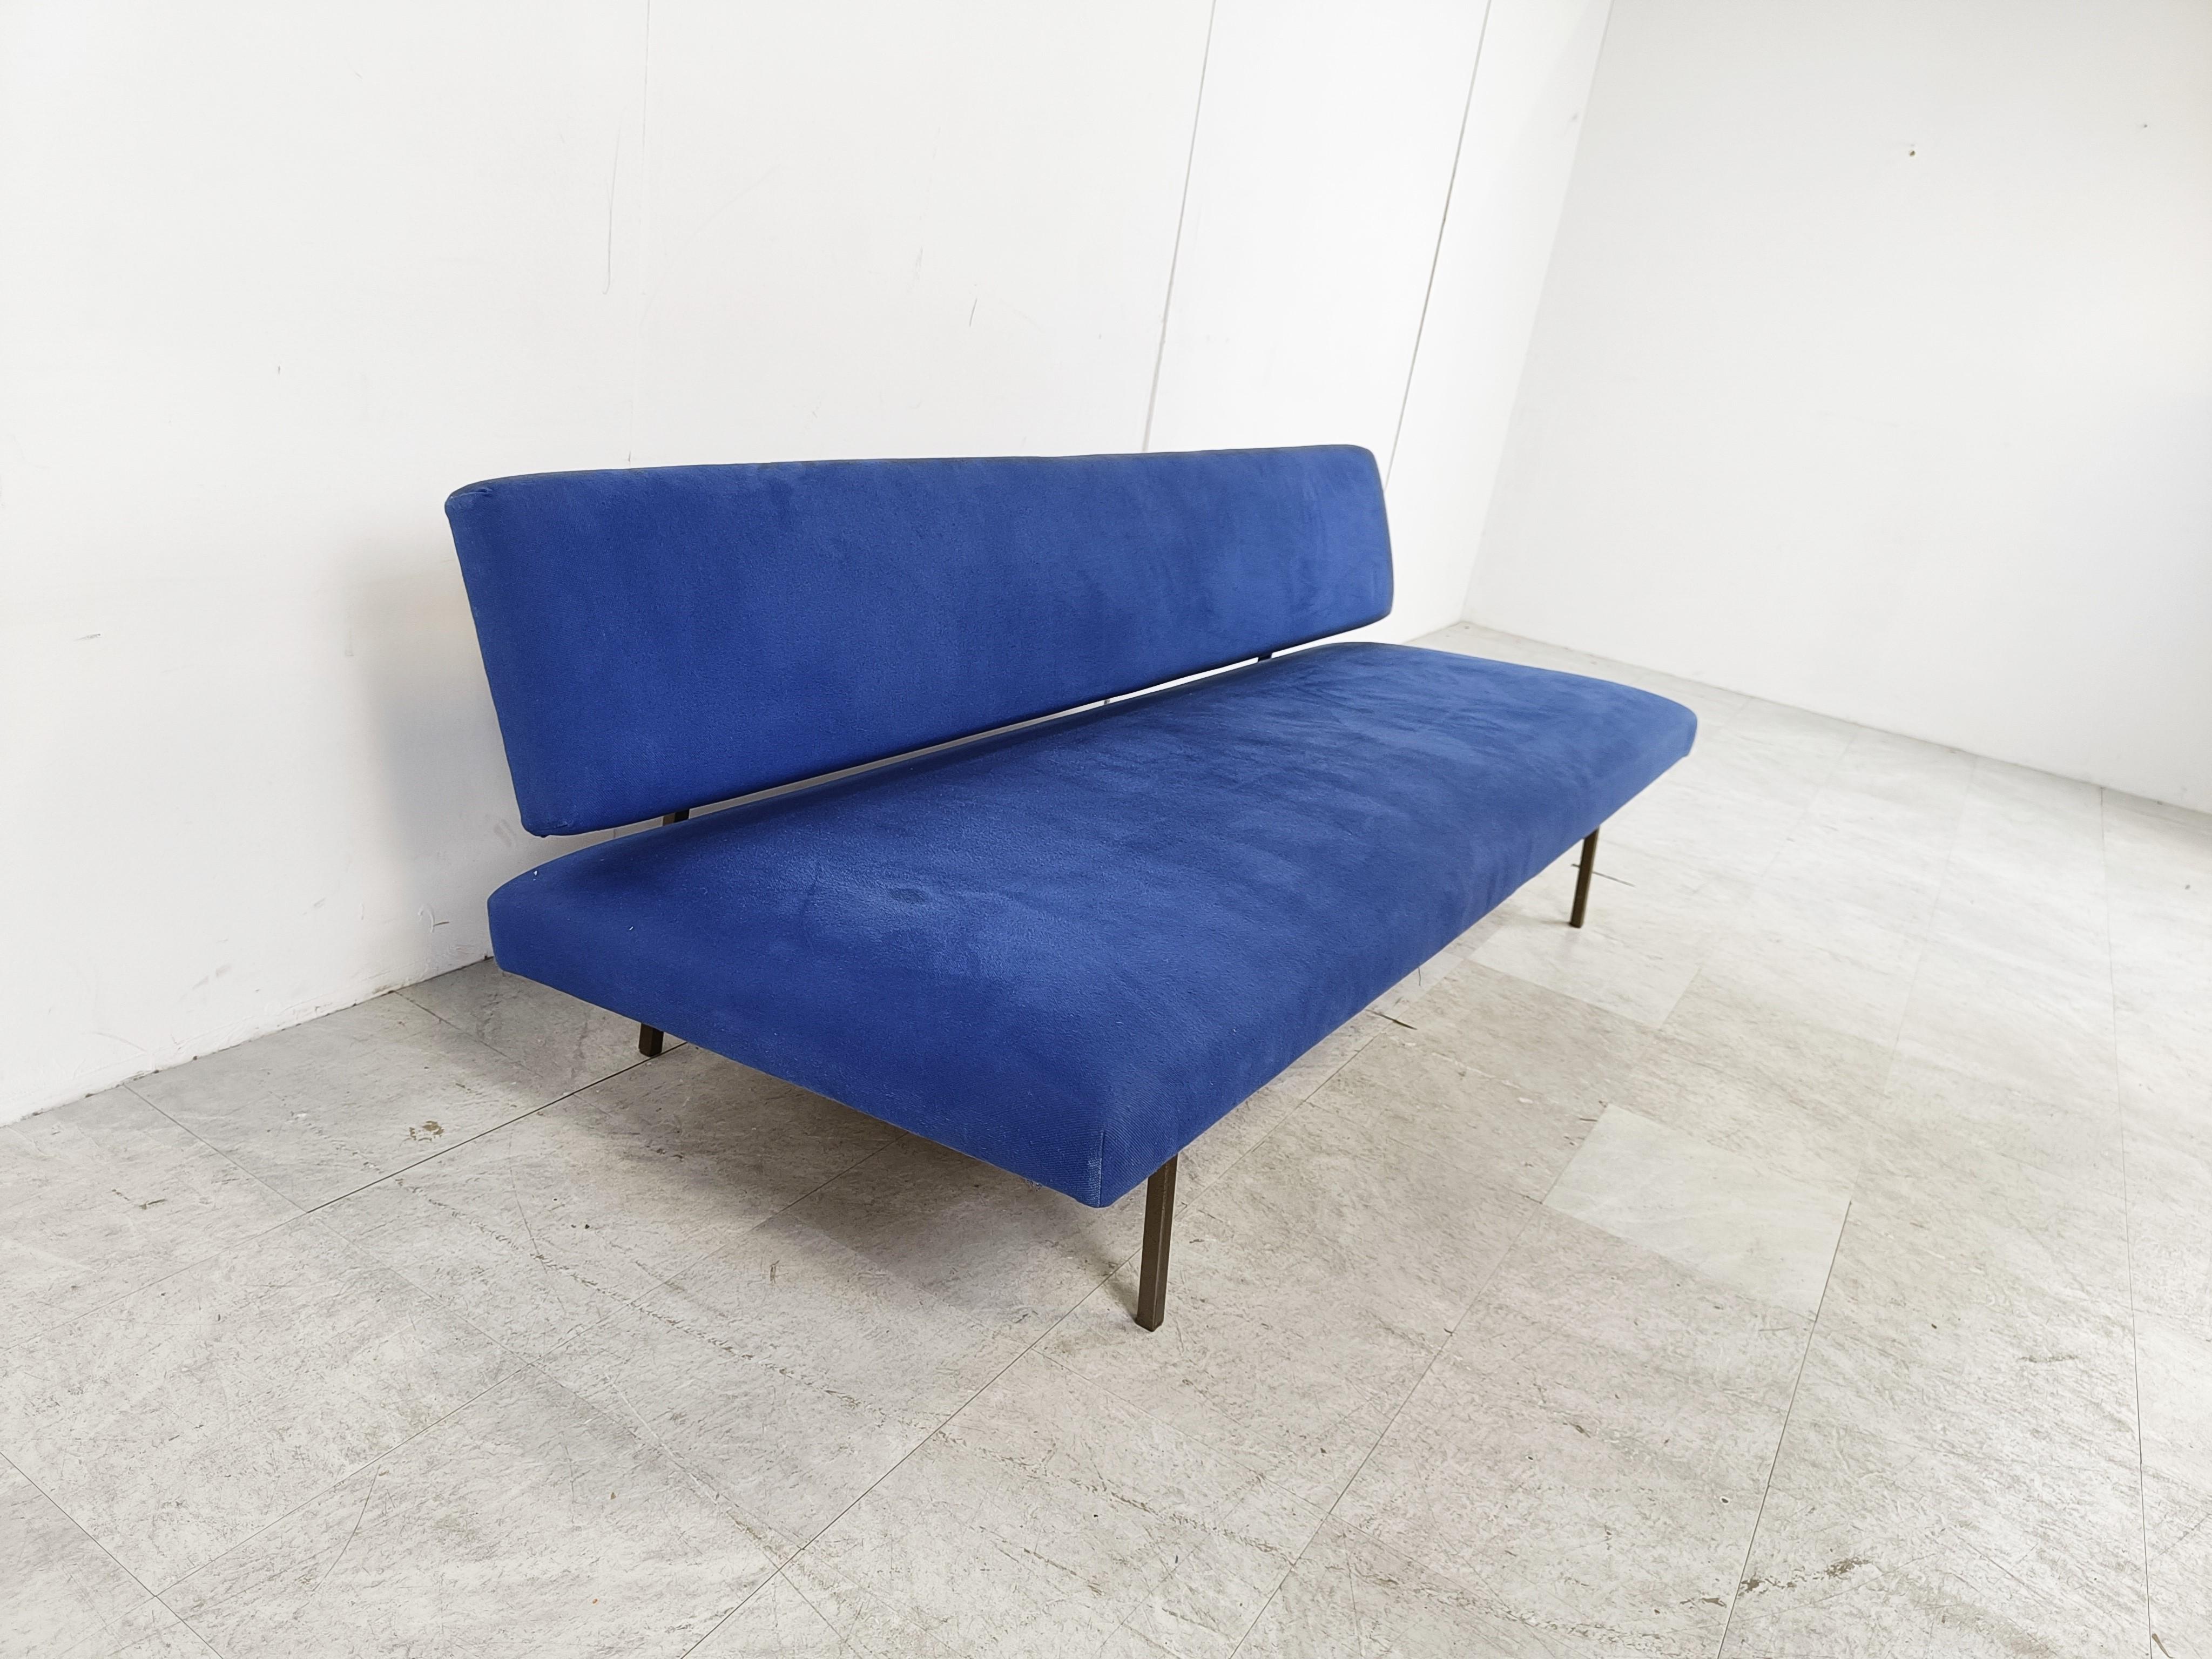 Modernist daybed designed by Rob Parry for Gelderland.

Beautiful blue fabric with thick foam which provides a lot of comfort. Black metal frame.

Very simply you can slide out the seat transforming it from a sofa to a daybed.

Very good